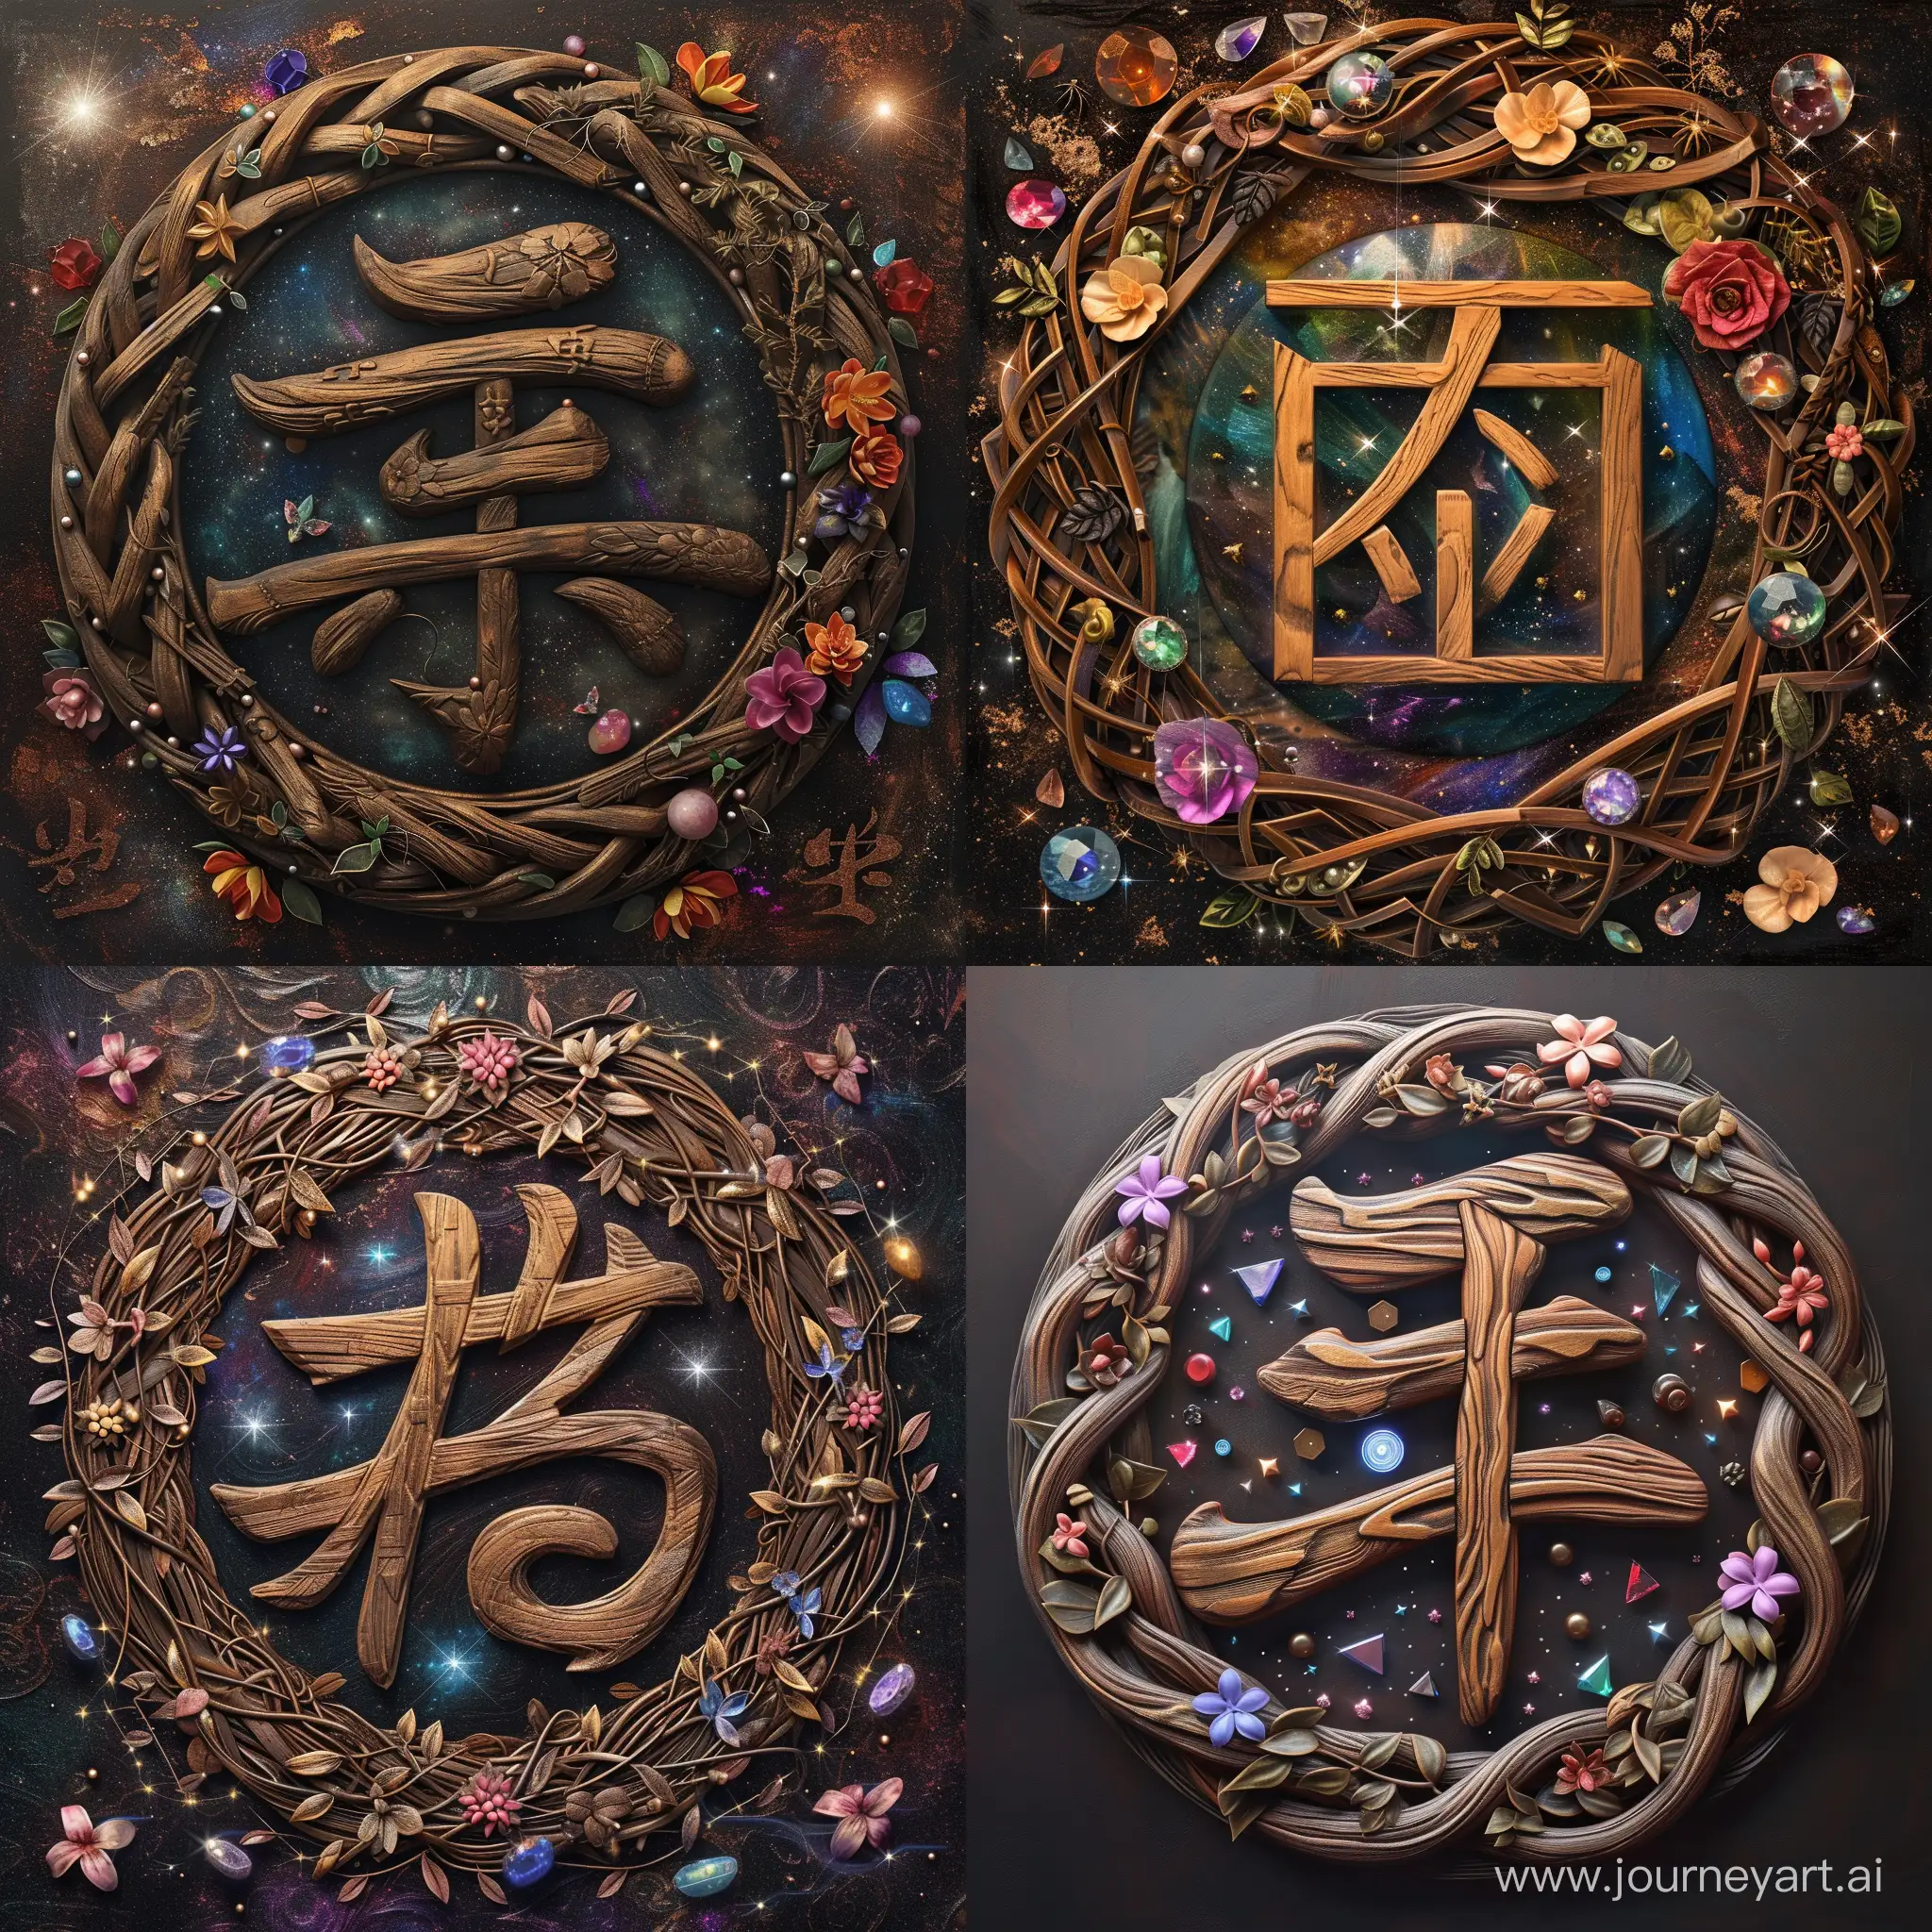 Chinese-Character-Surrounded-by-Colorful-Gemstones-and-Floral-Patterns